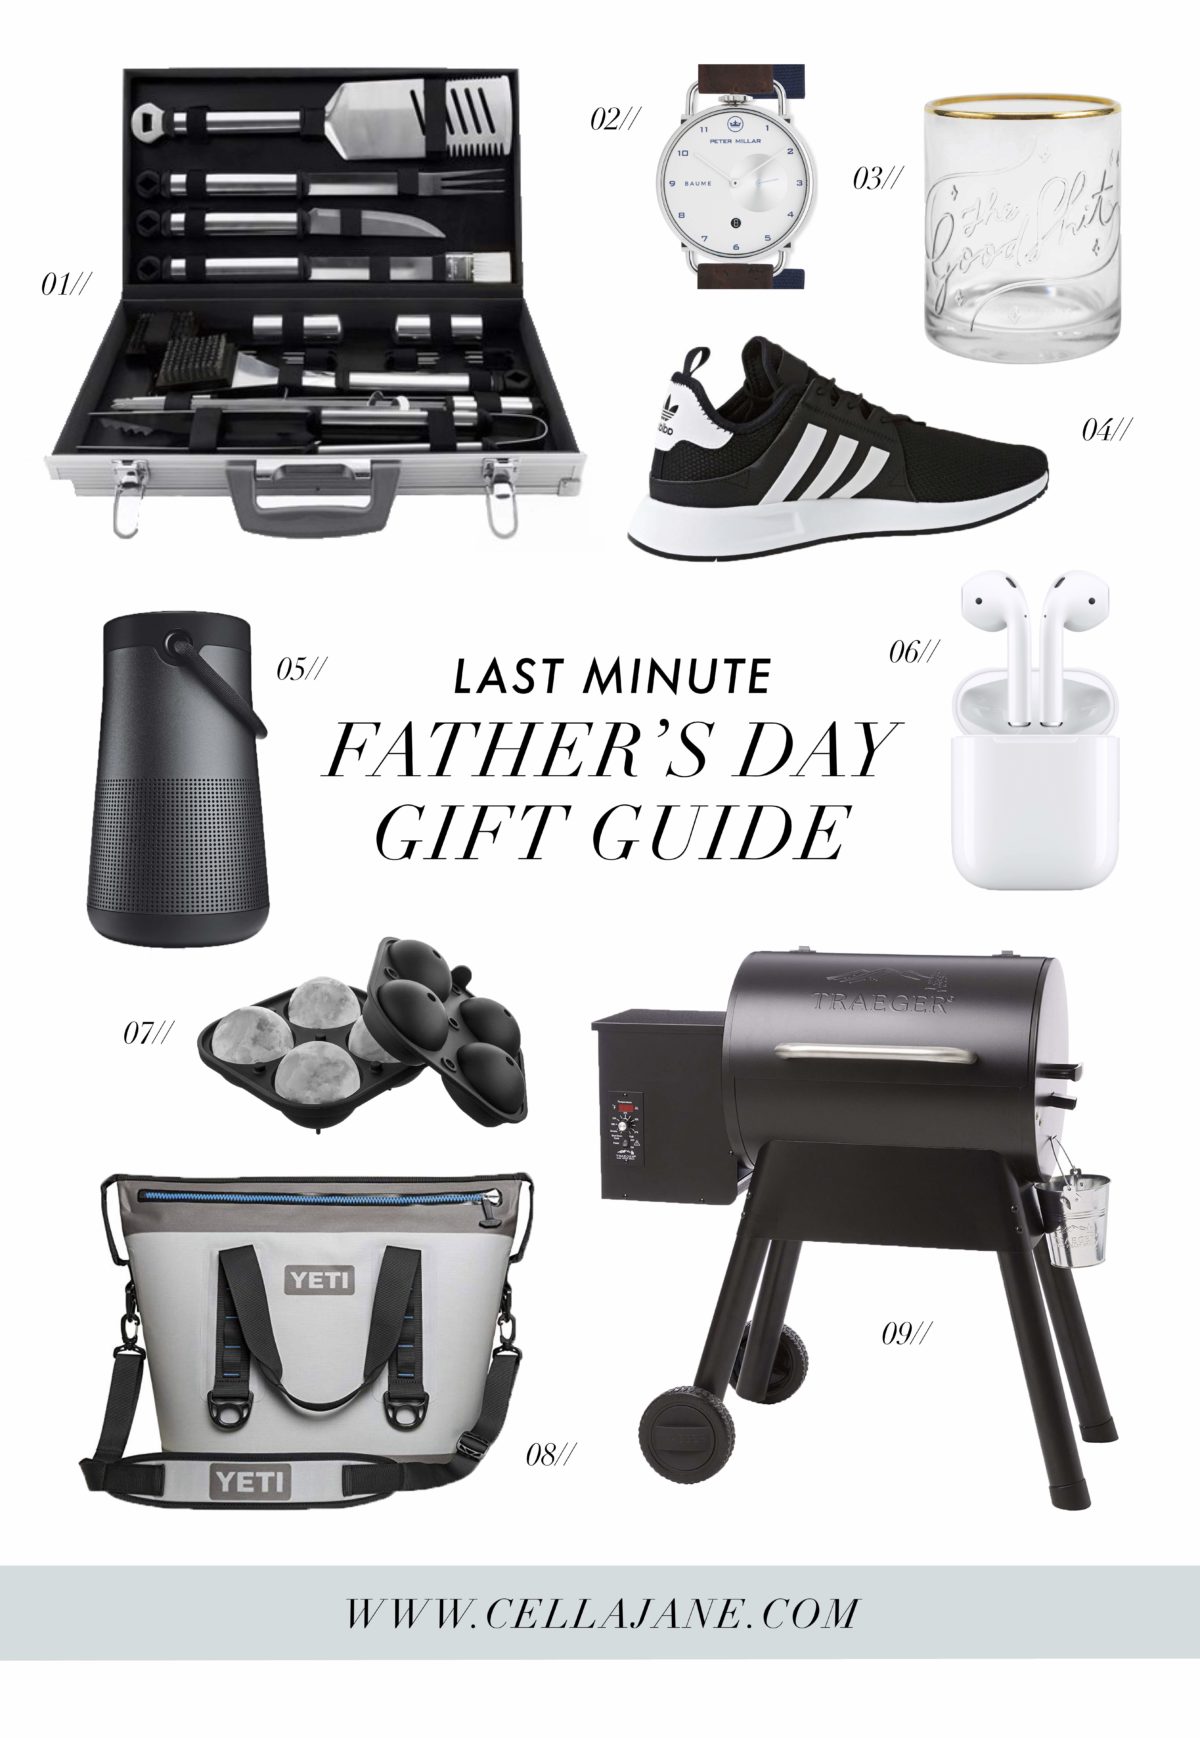 The Father's Day Gift Guide